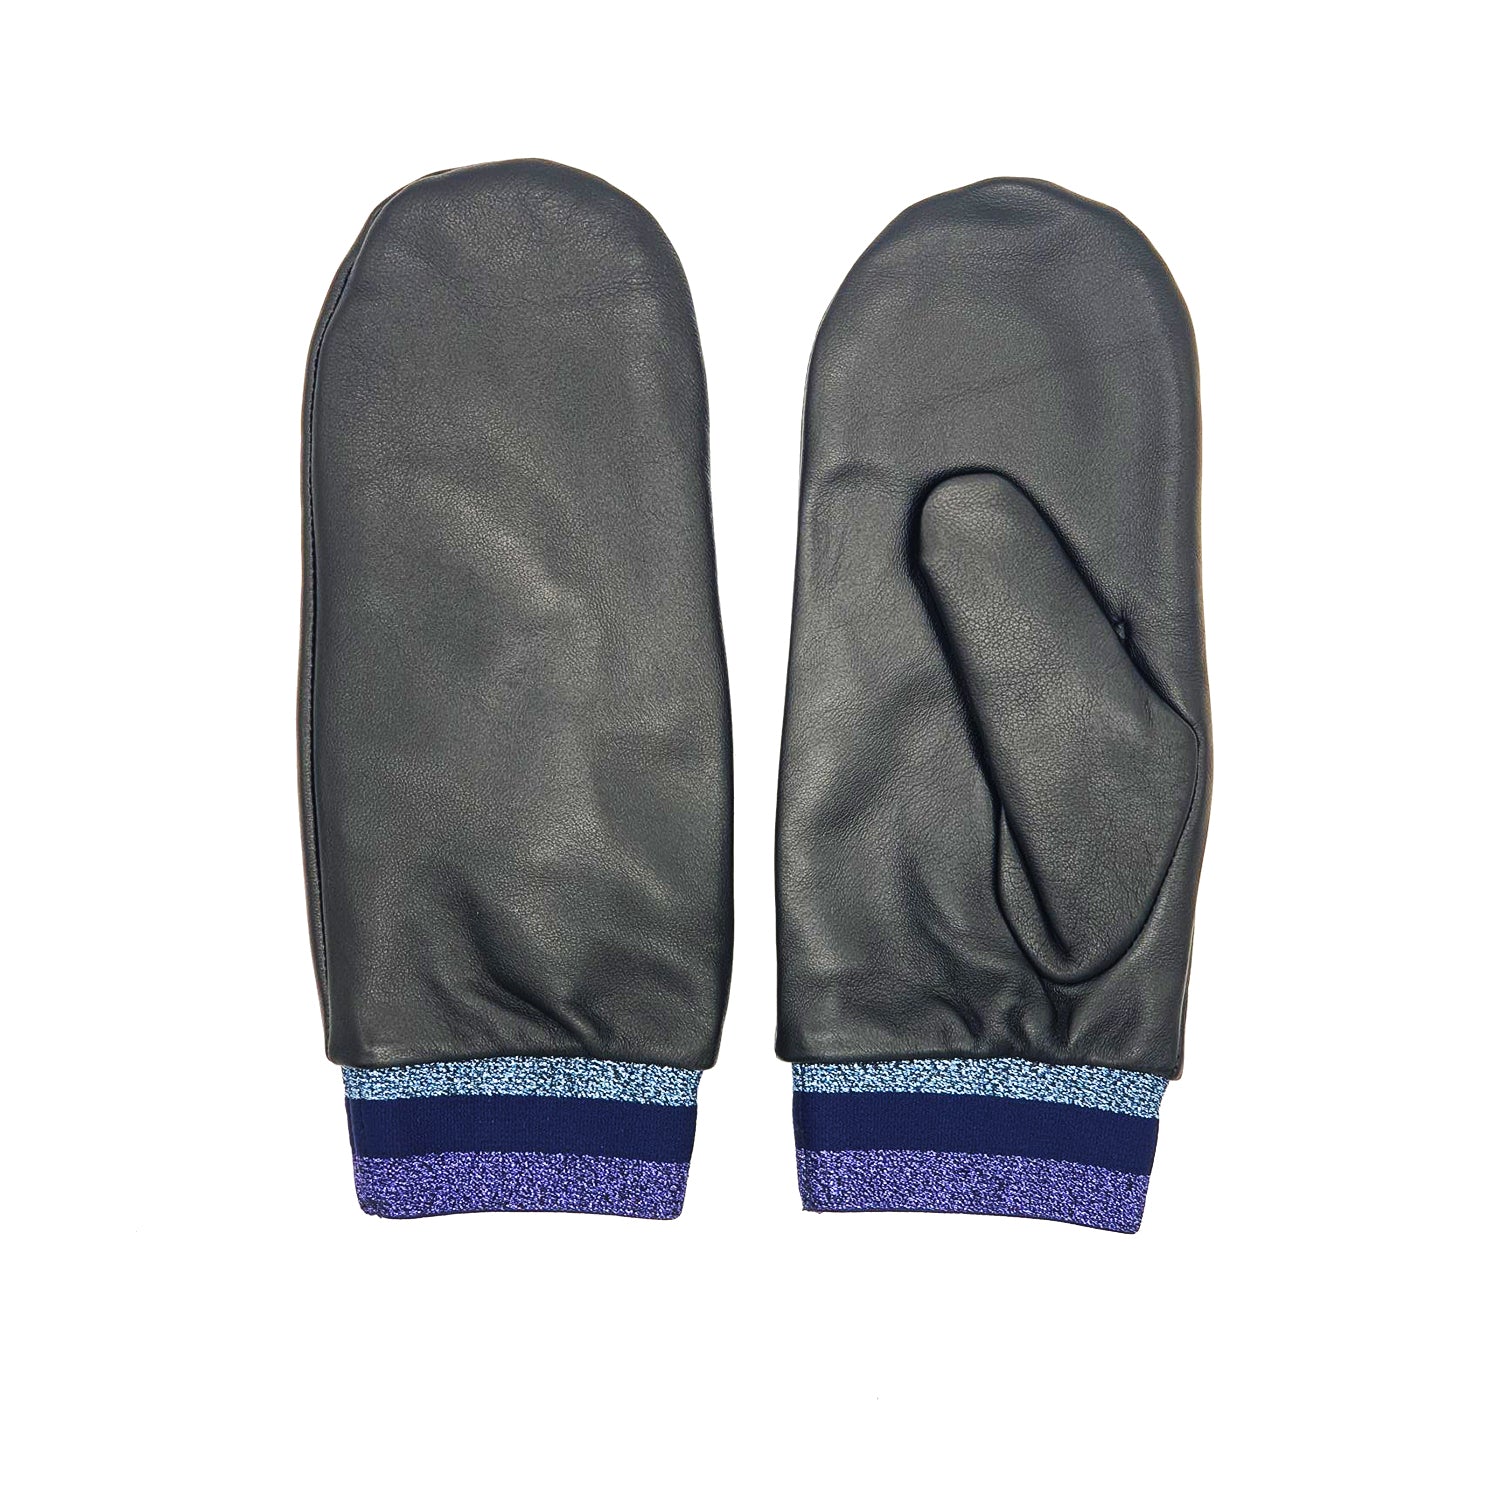 Lupin Leather Mittens